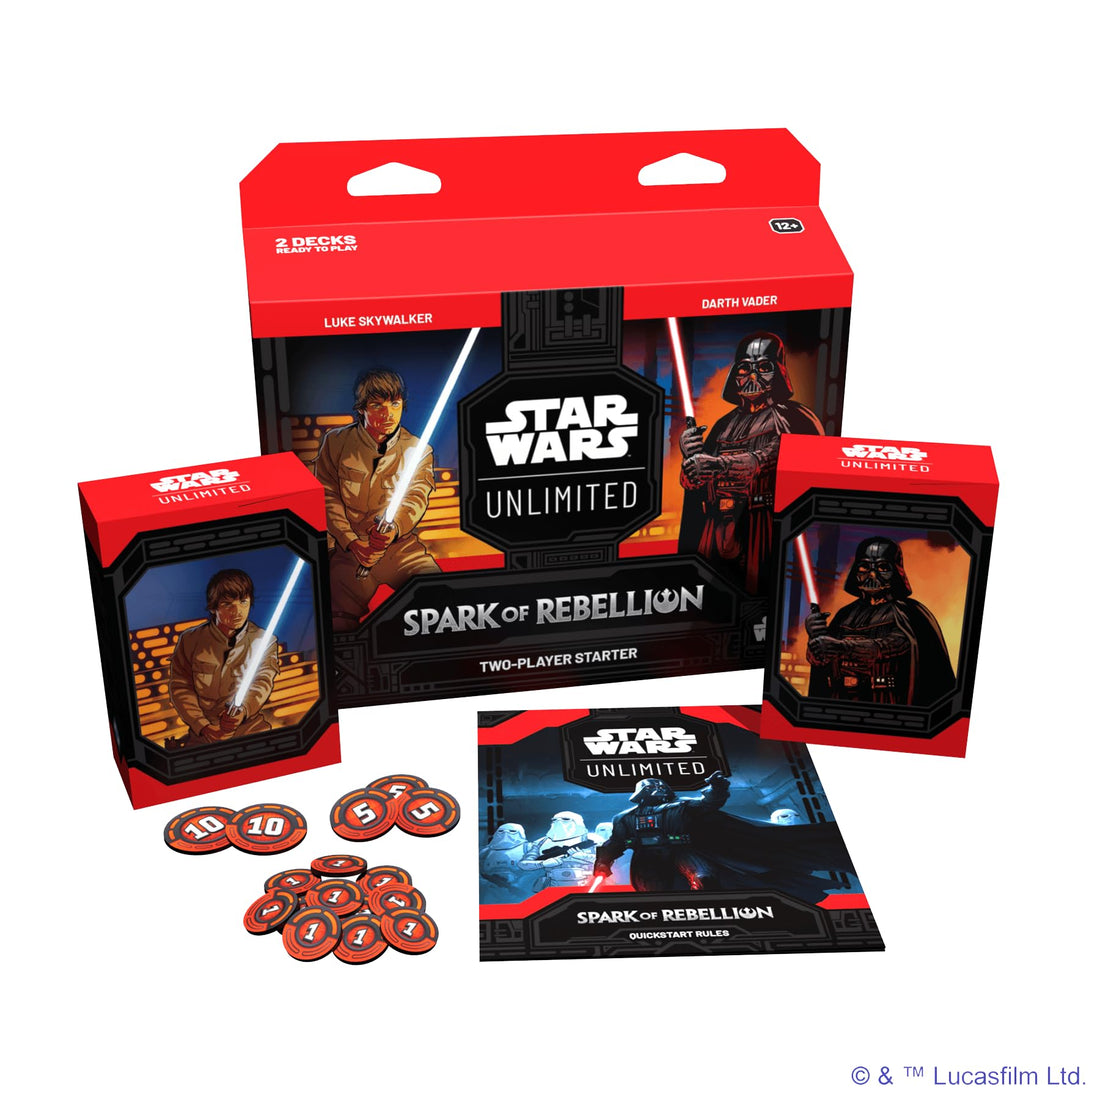 Star Wars: Unlimited TCG Spark of Rebellion TWO-PLAYER STARTER SET - Learn, Battle, Collect! Trading Card Game for Kids and Adults, Ages 12+, 2 Players, 20 Min Playtime, Made by Fantasy Flight Games